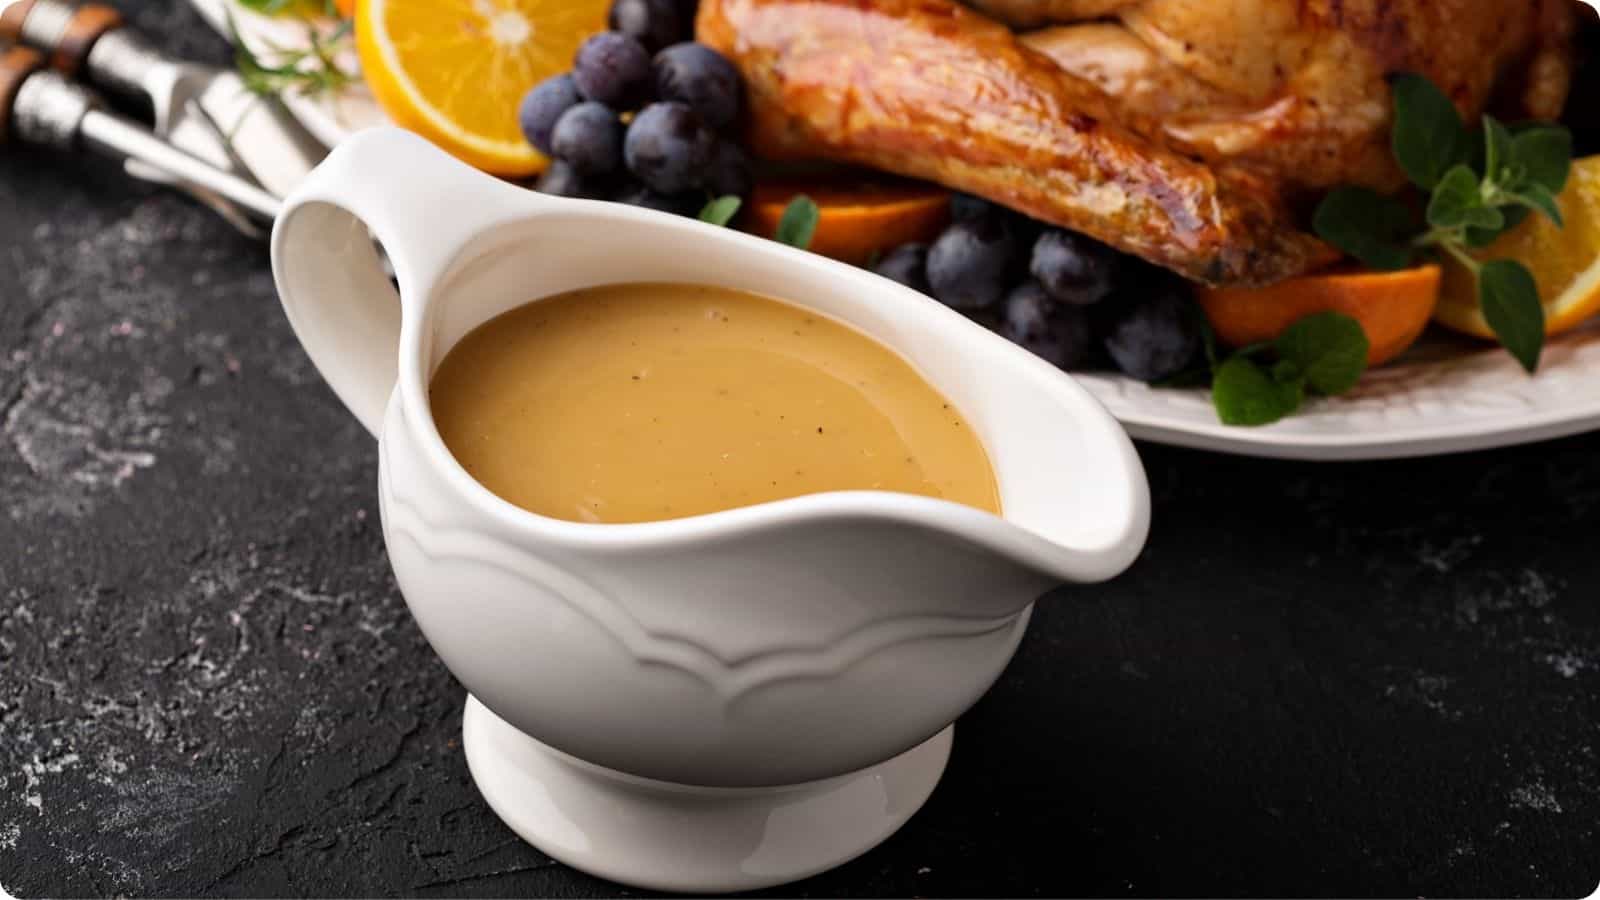 Gravy dispenser atop a charcoal-colored table, with a turkey in the background.